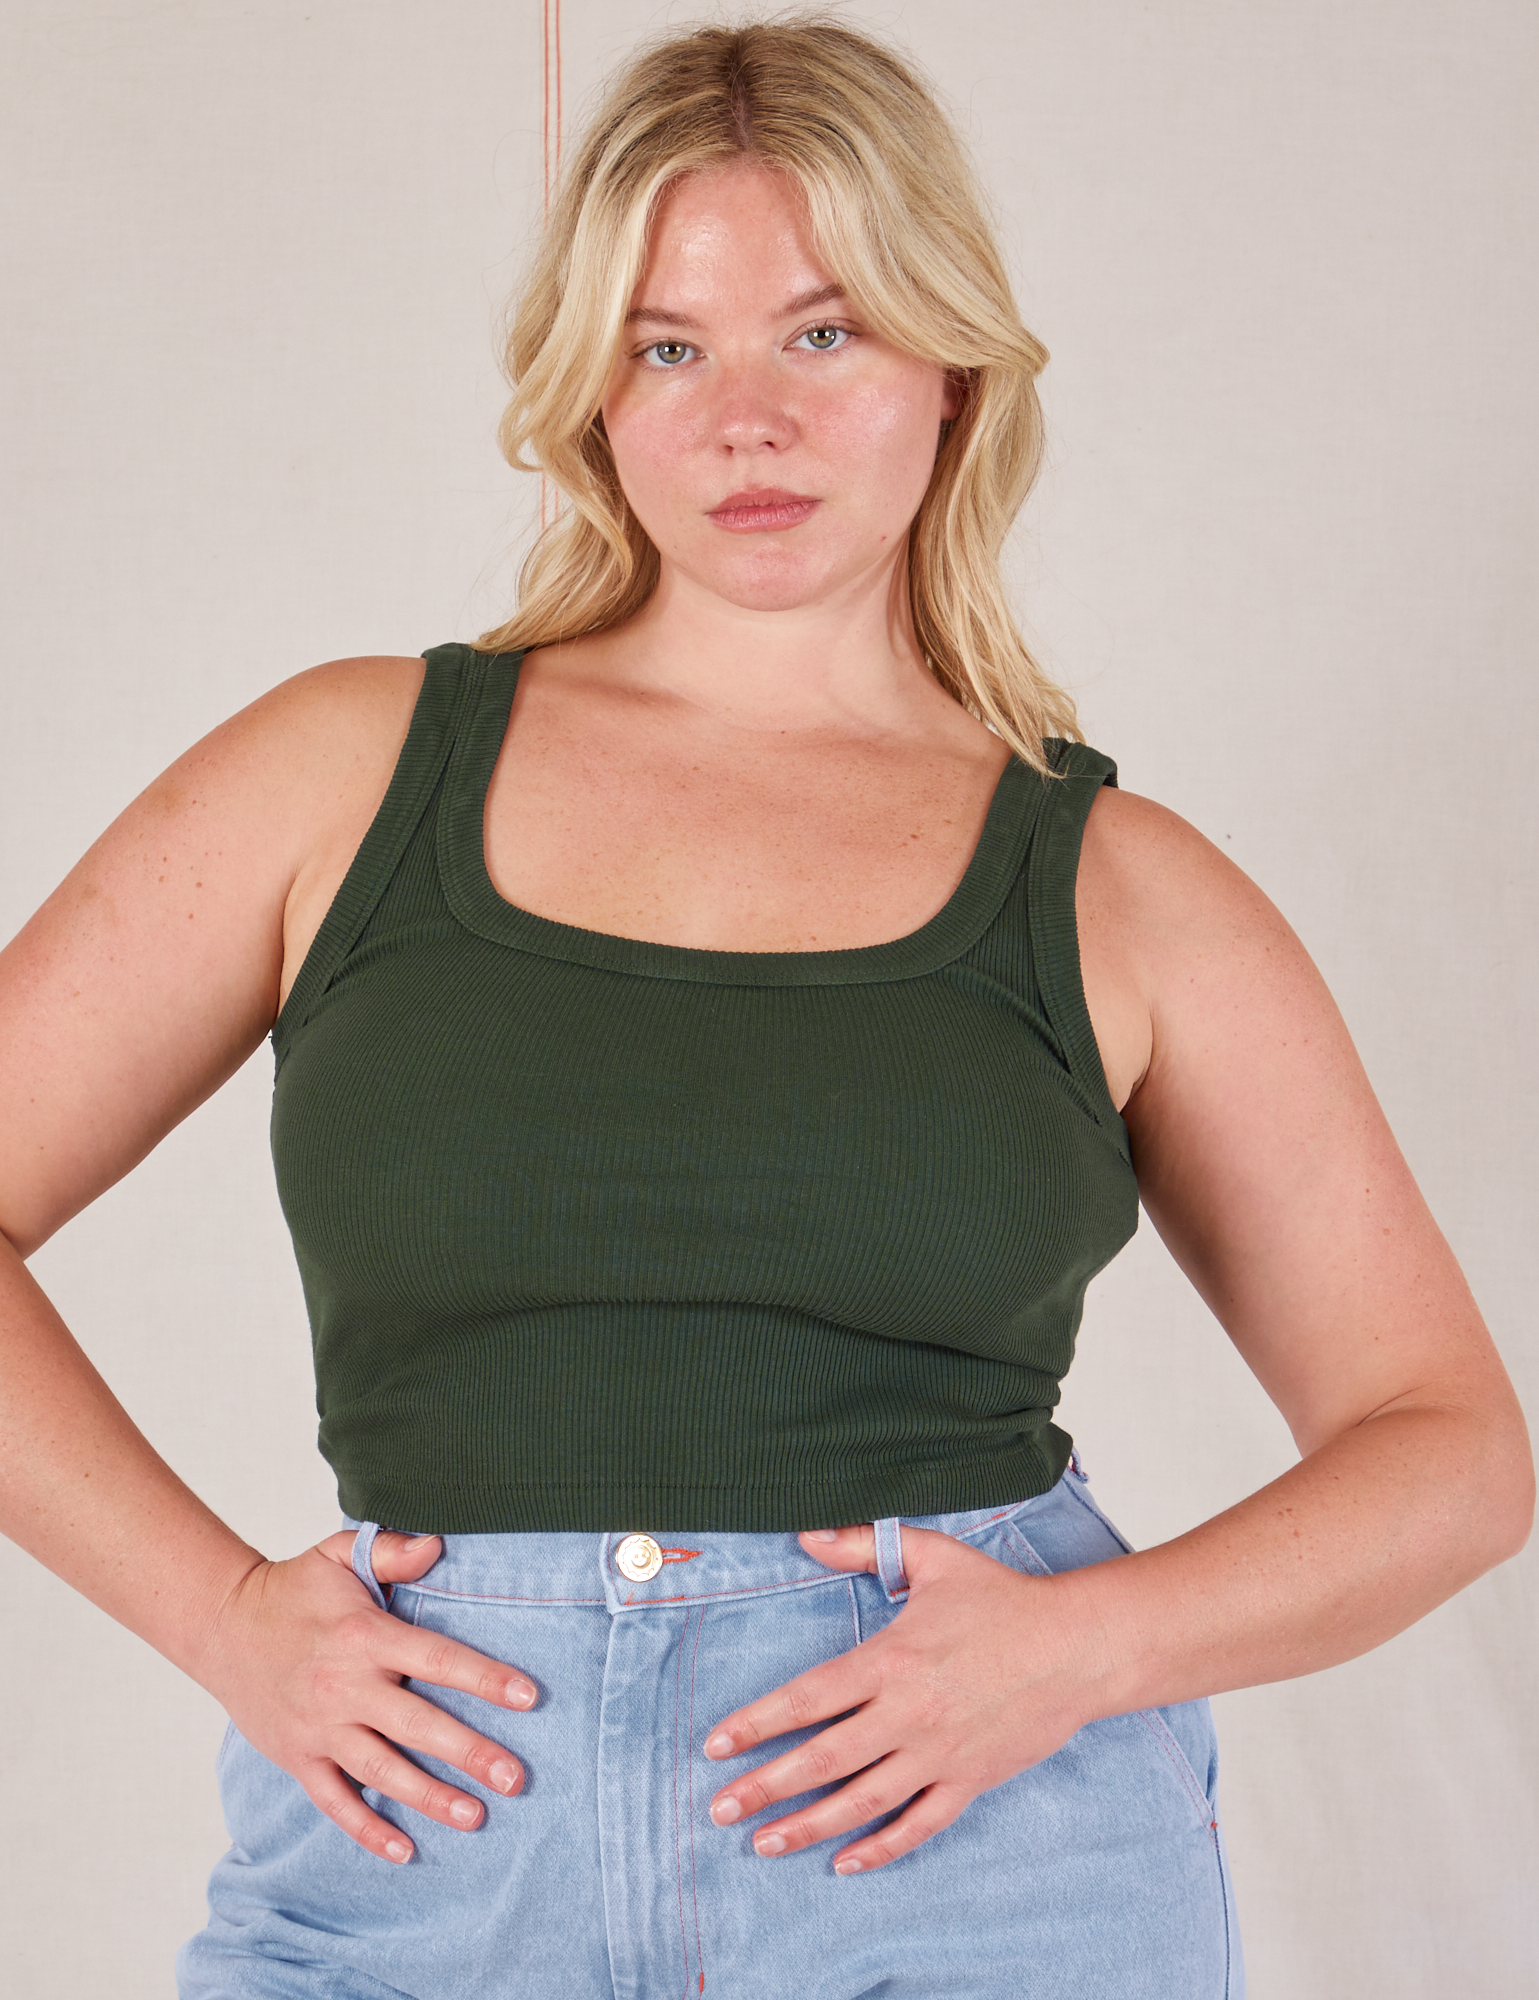 Lish is wearing Square Neck Tank in Swamp Green